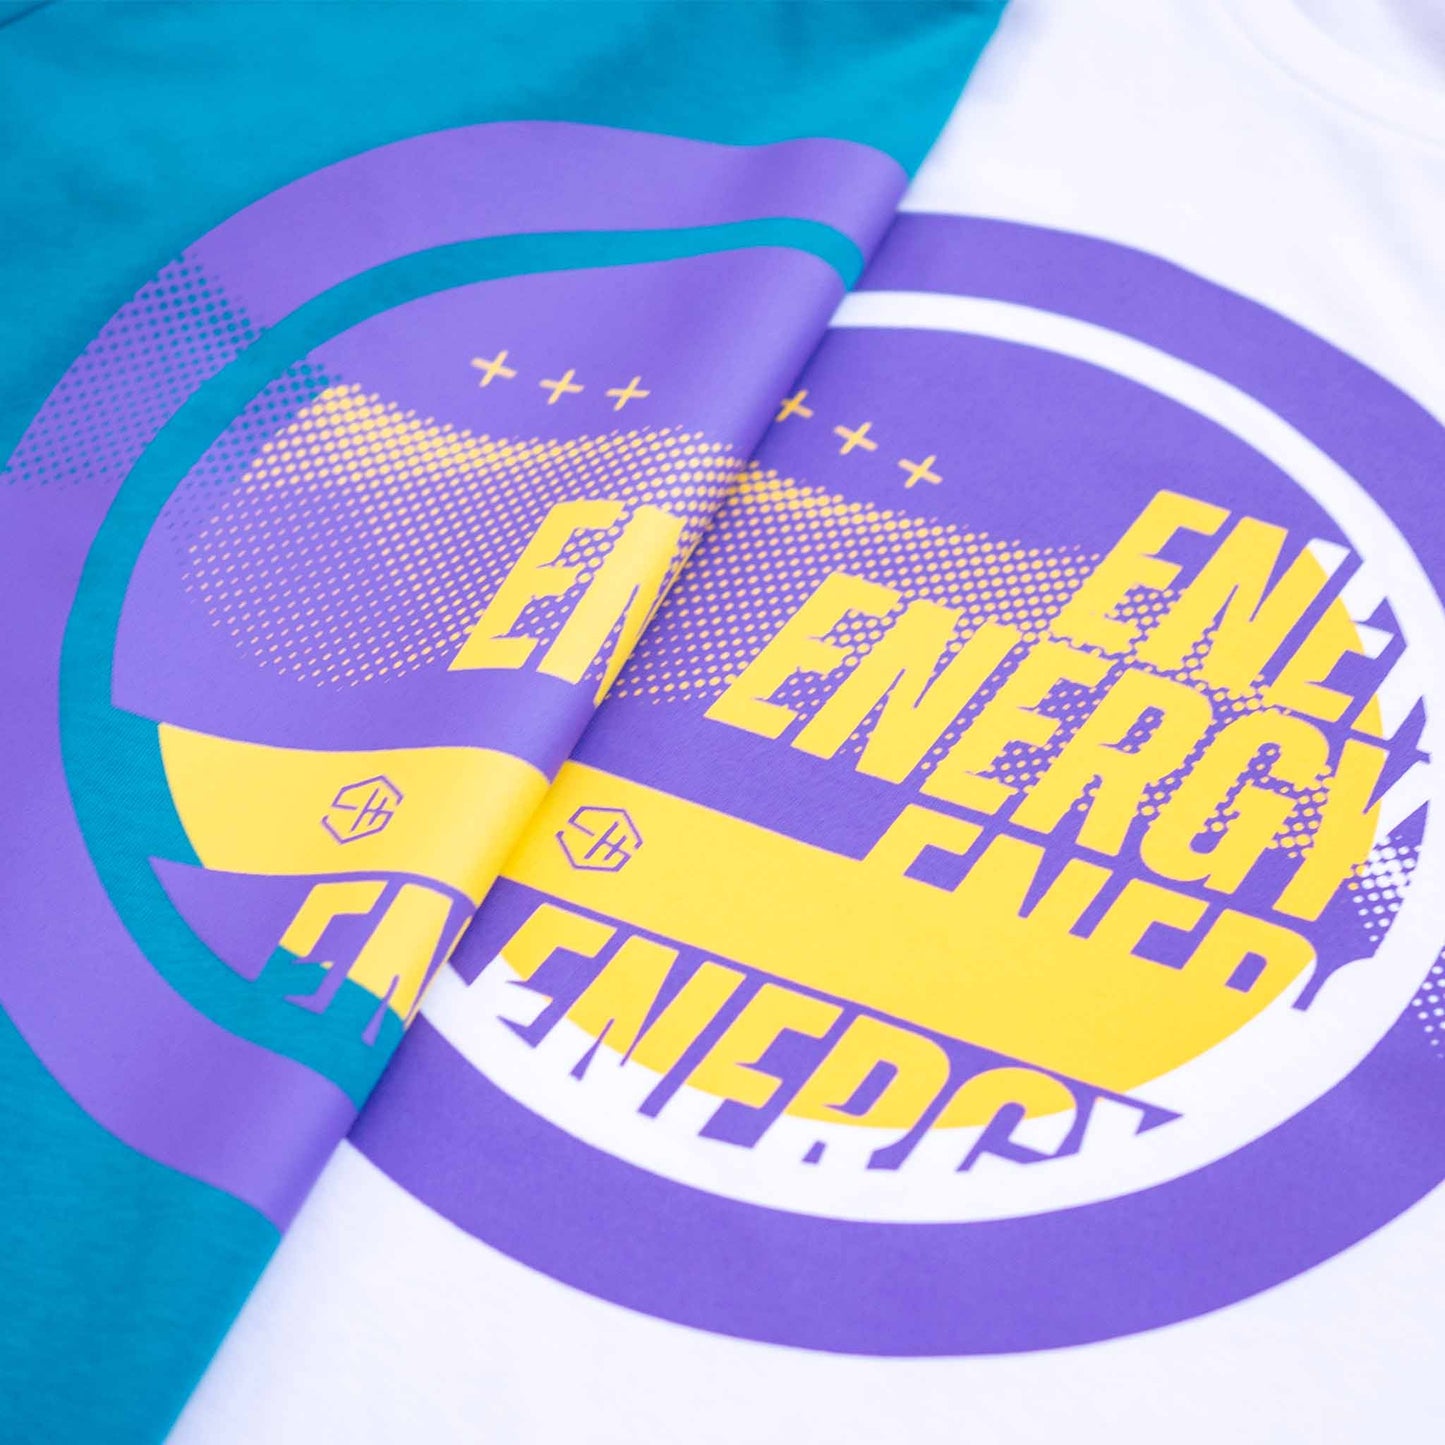 Energy T-shirt in teal and white options